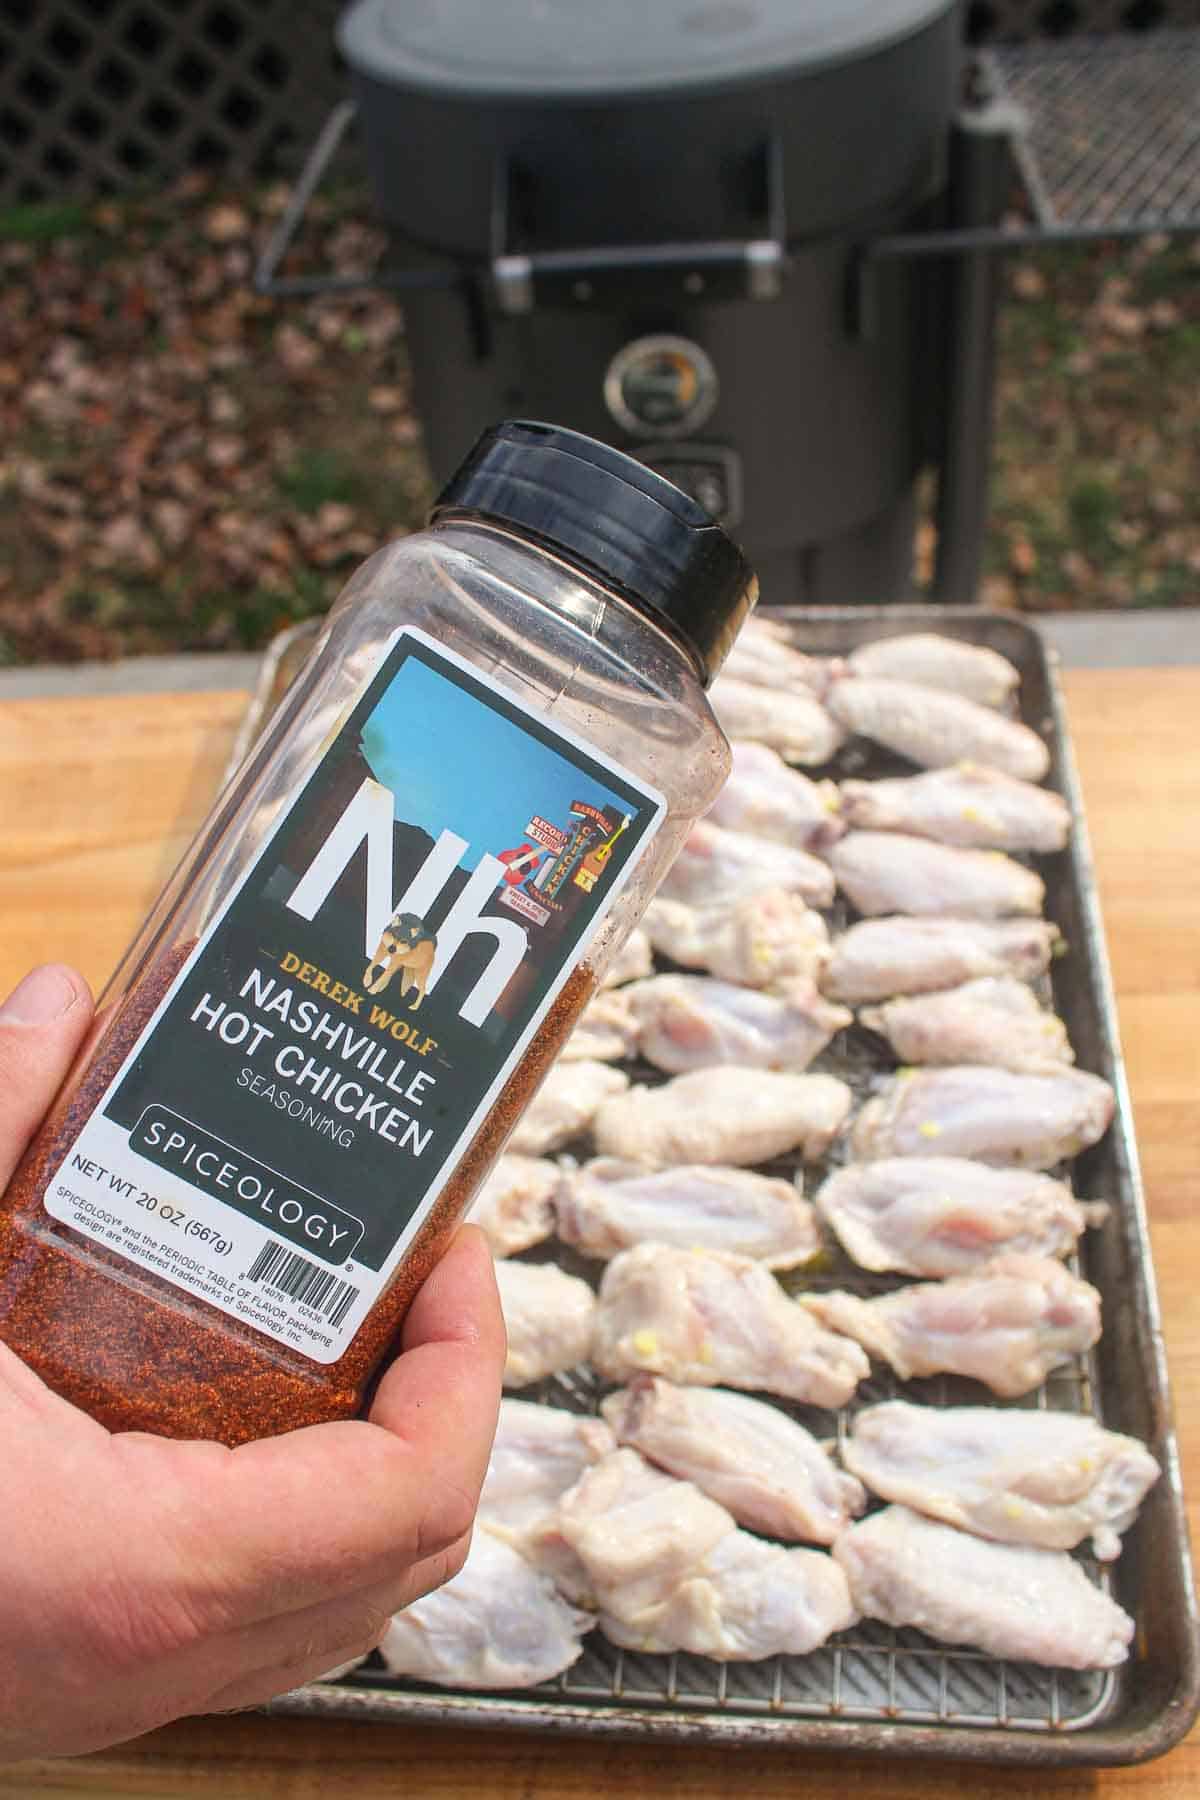 Nashville Hot Seasoning about to cover the chicken wings.